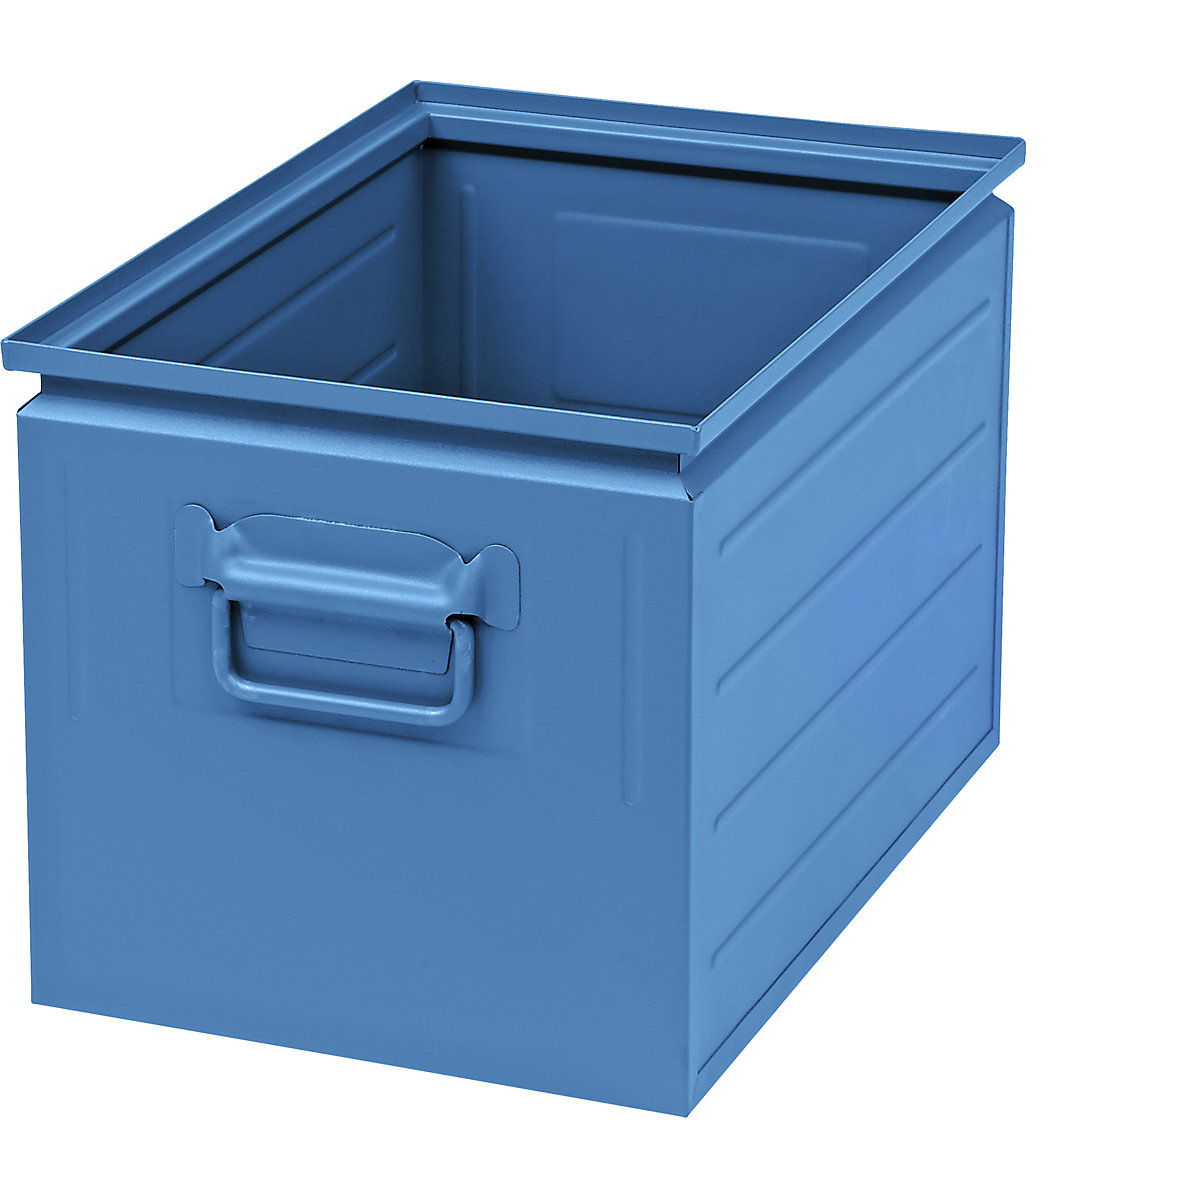 Stacking container made of sheet steel, capacity approx. 35 l, light blue RAL 5012-5